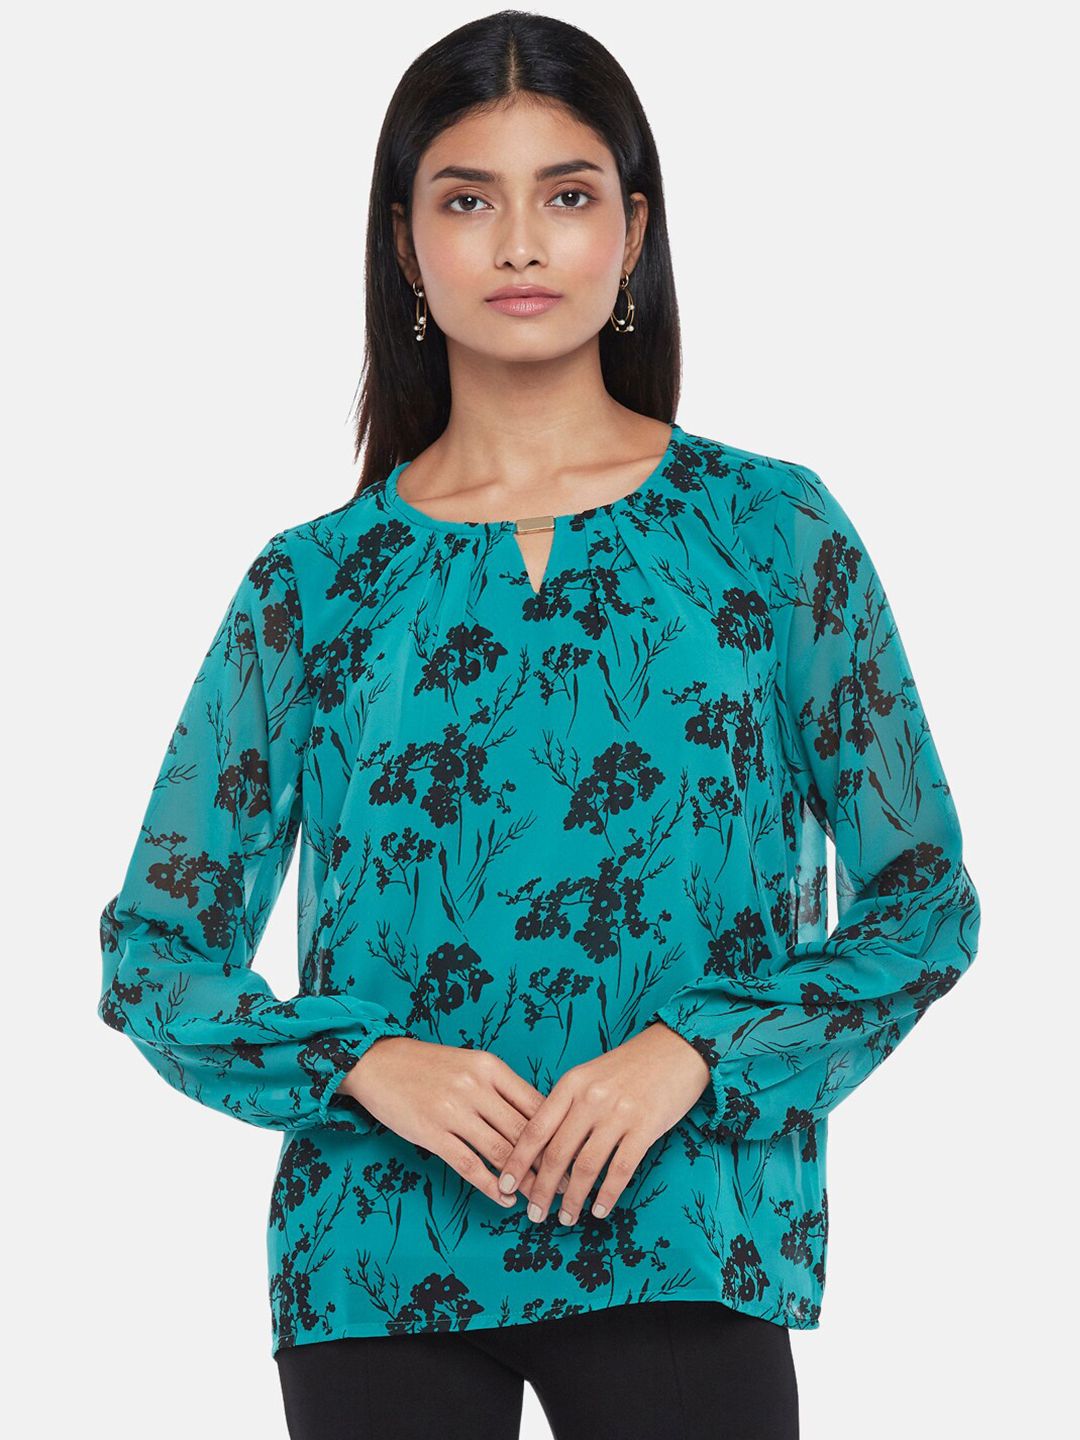 Annabelle by Pantaloons Women Turquoise Blue Floral Print Keyhole Neck Top Price in India